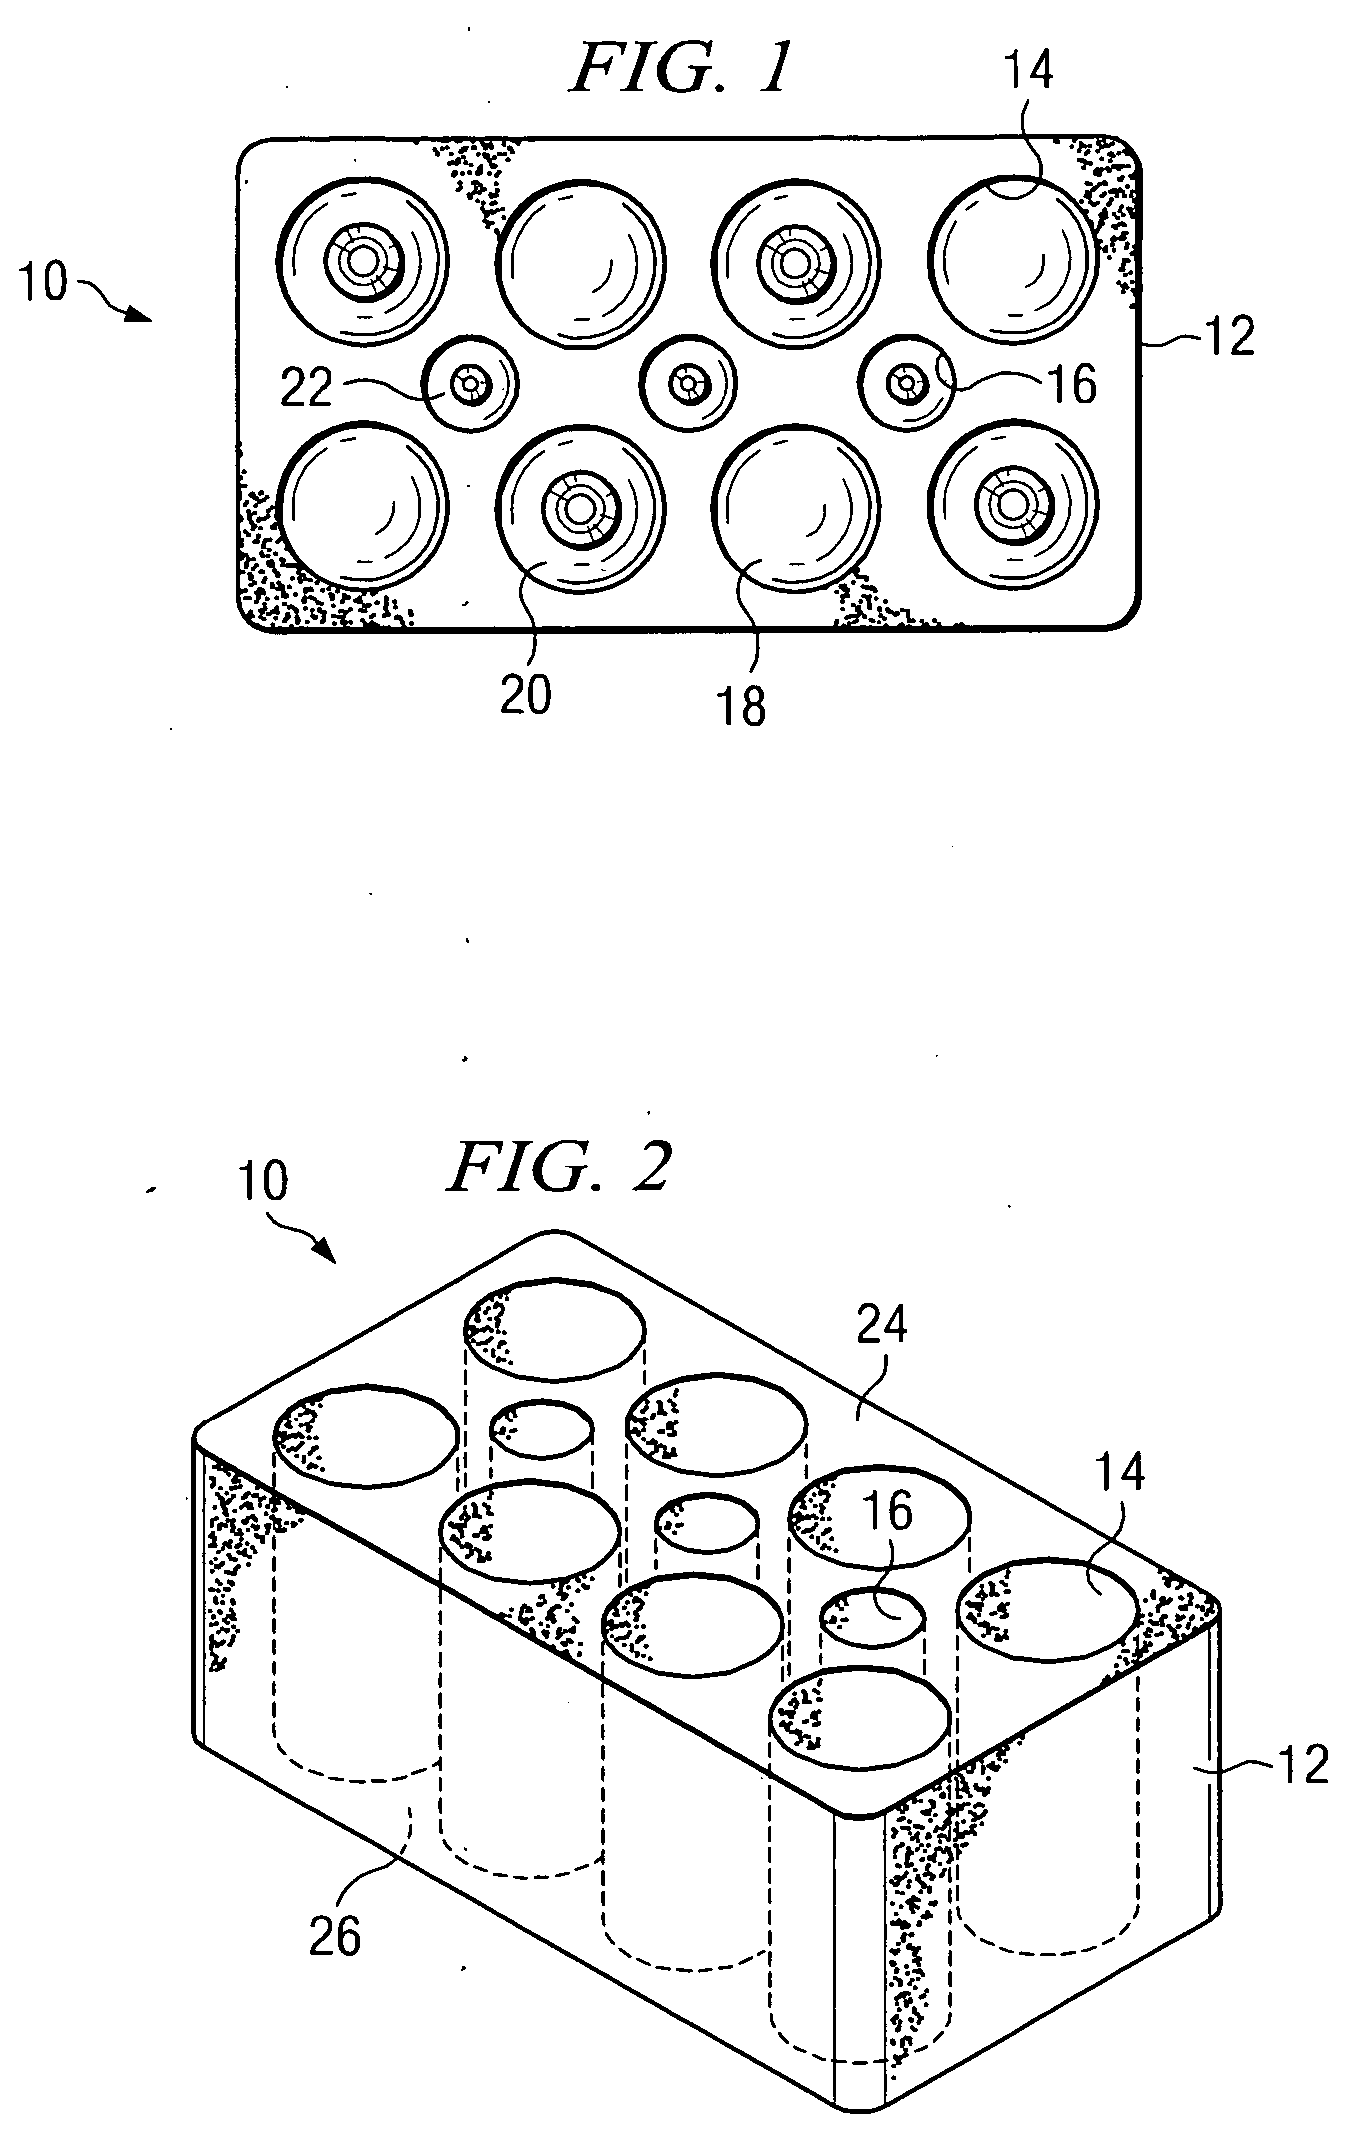 Storage device for light bulbs